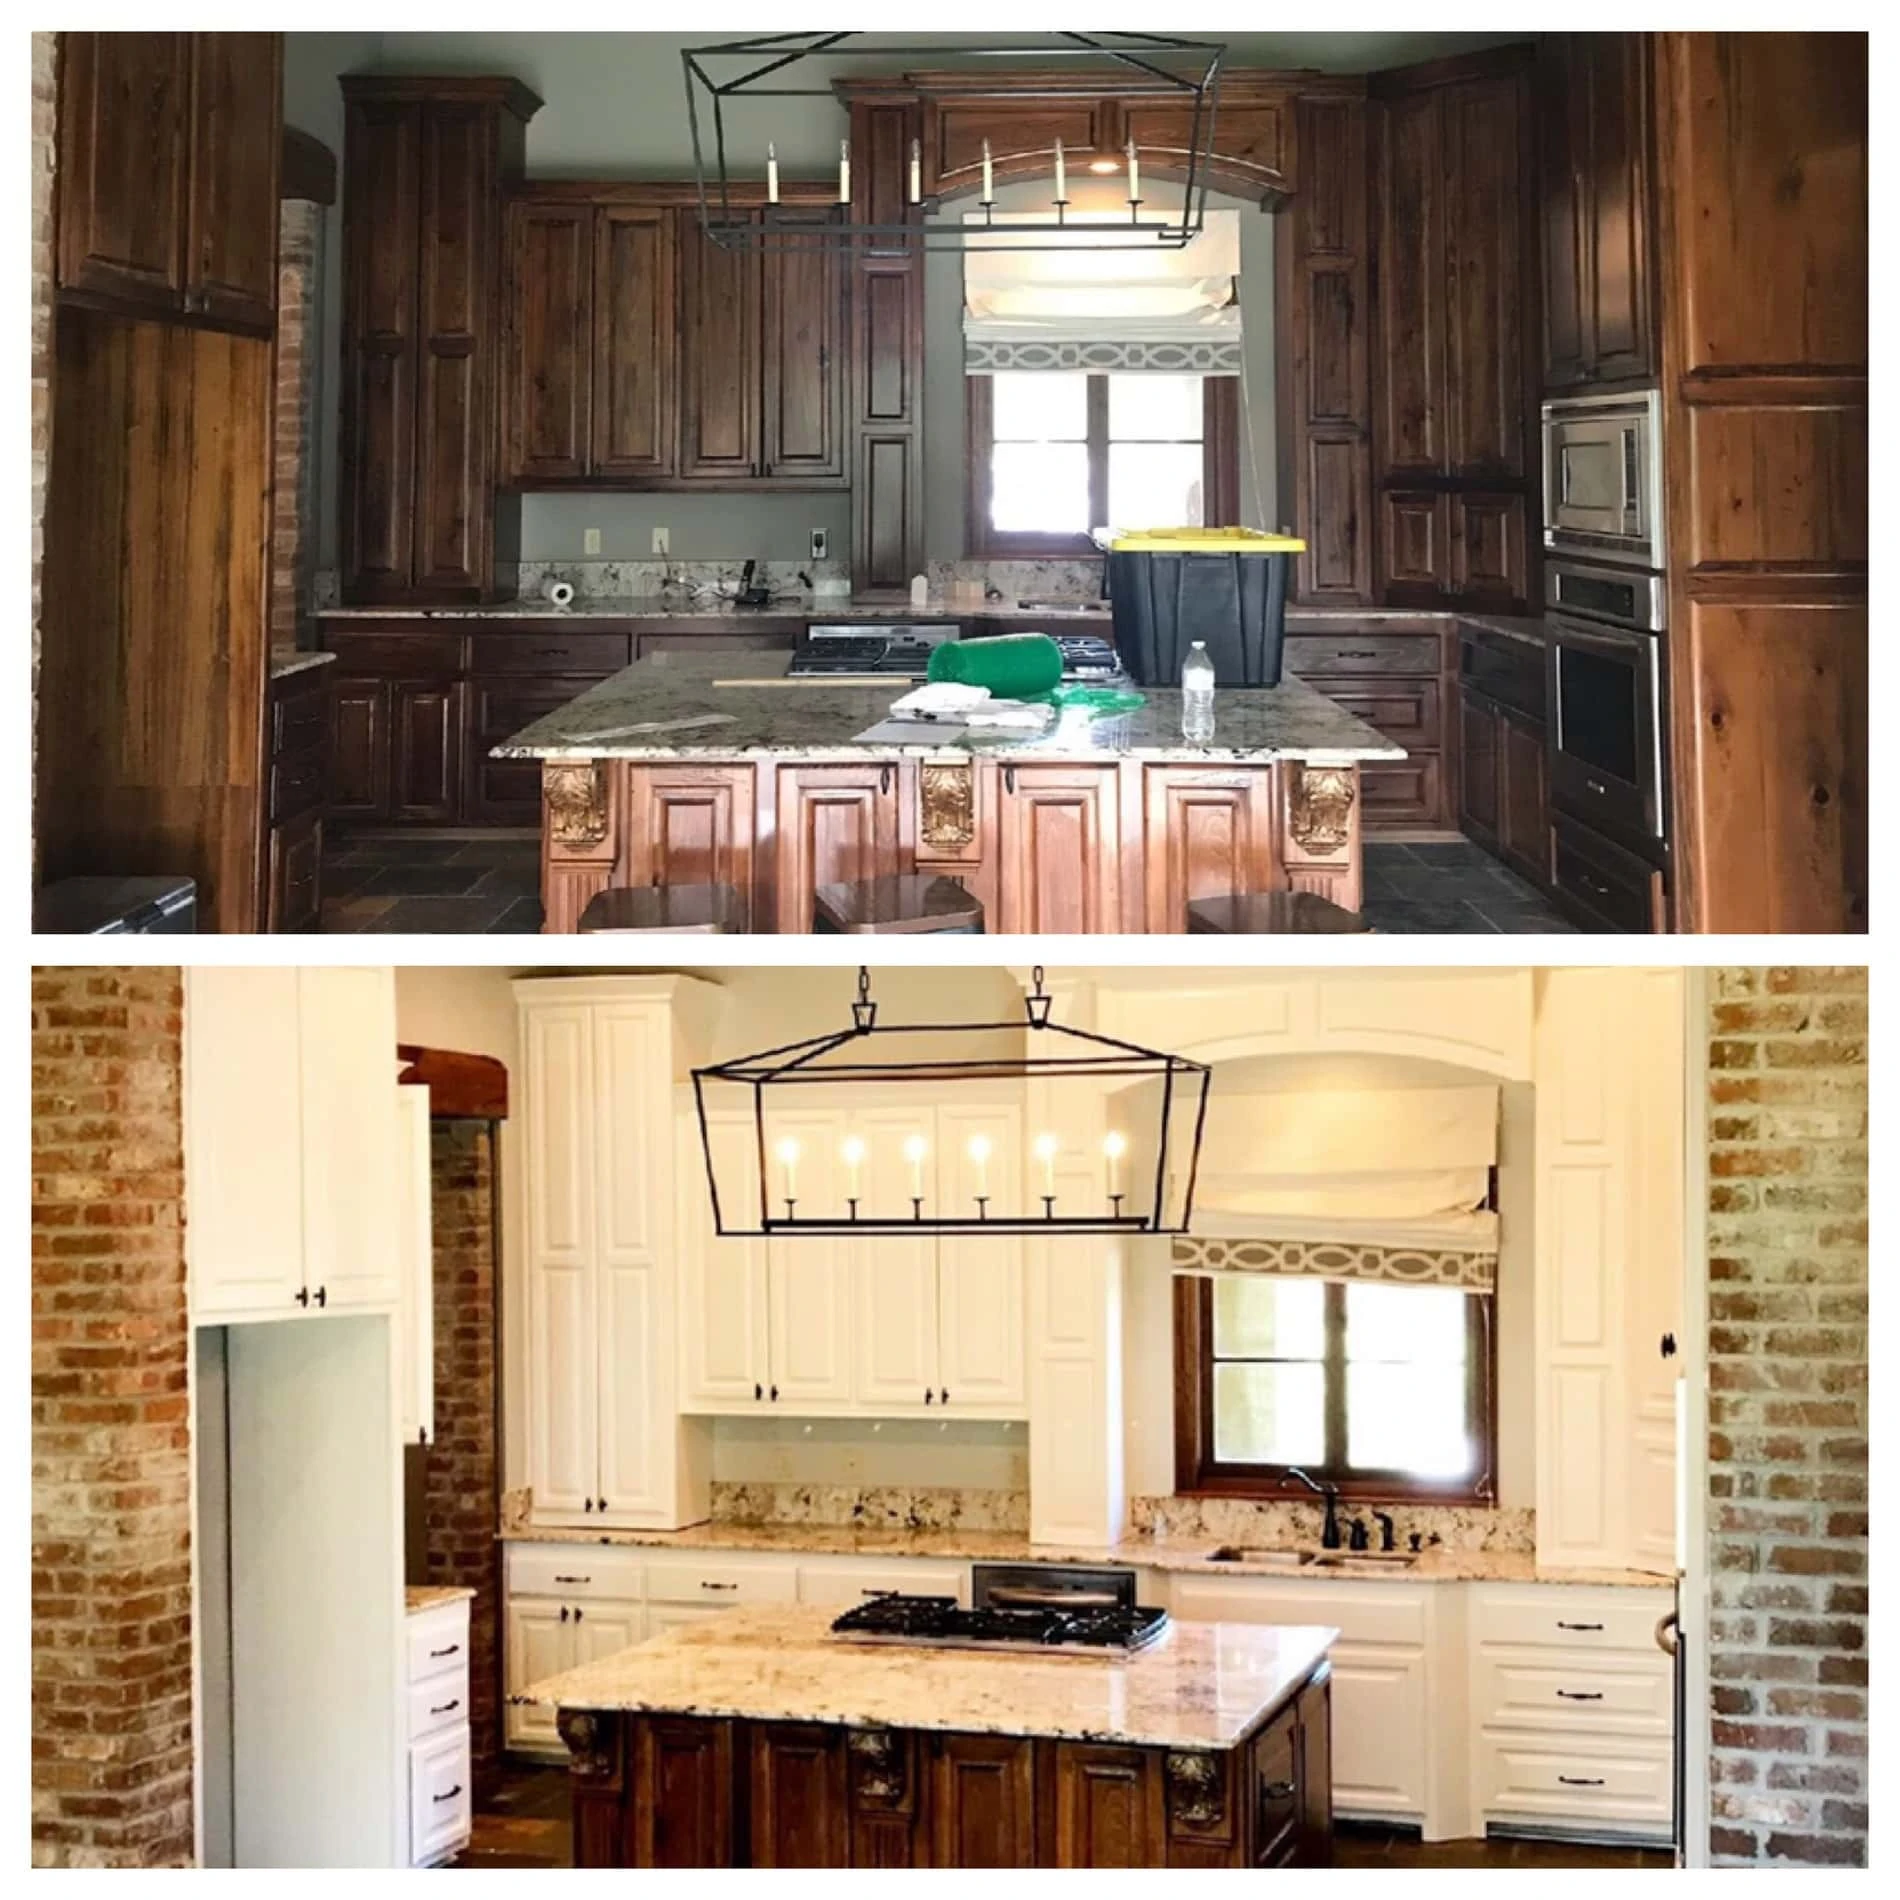 https://prestigiouspaintingbatonrouge.com/wp-content/uploads/2020/10/before-and-after-kitchen-cabinets